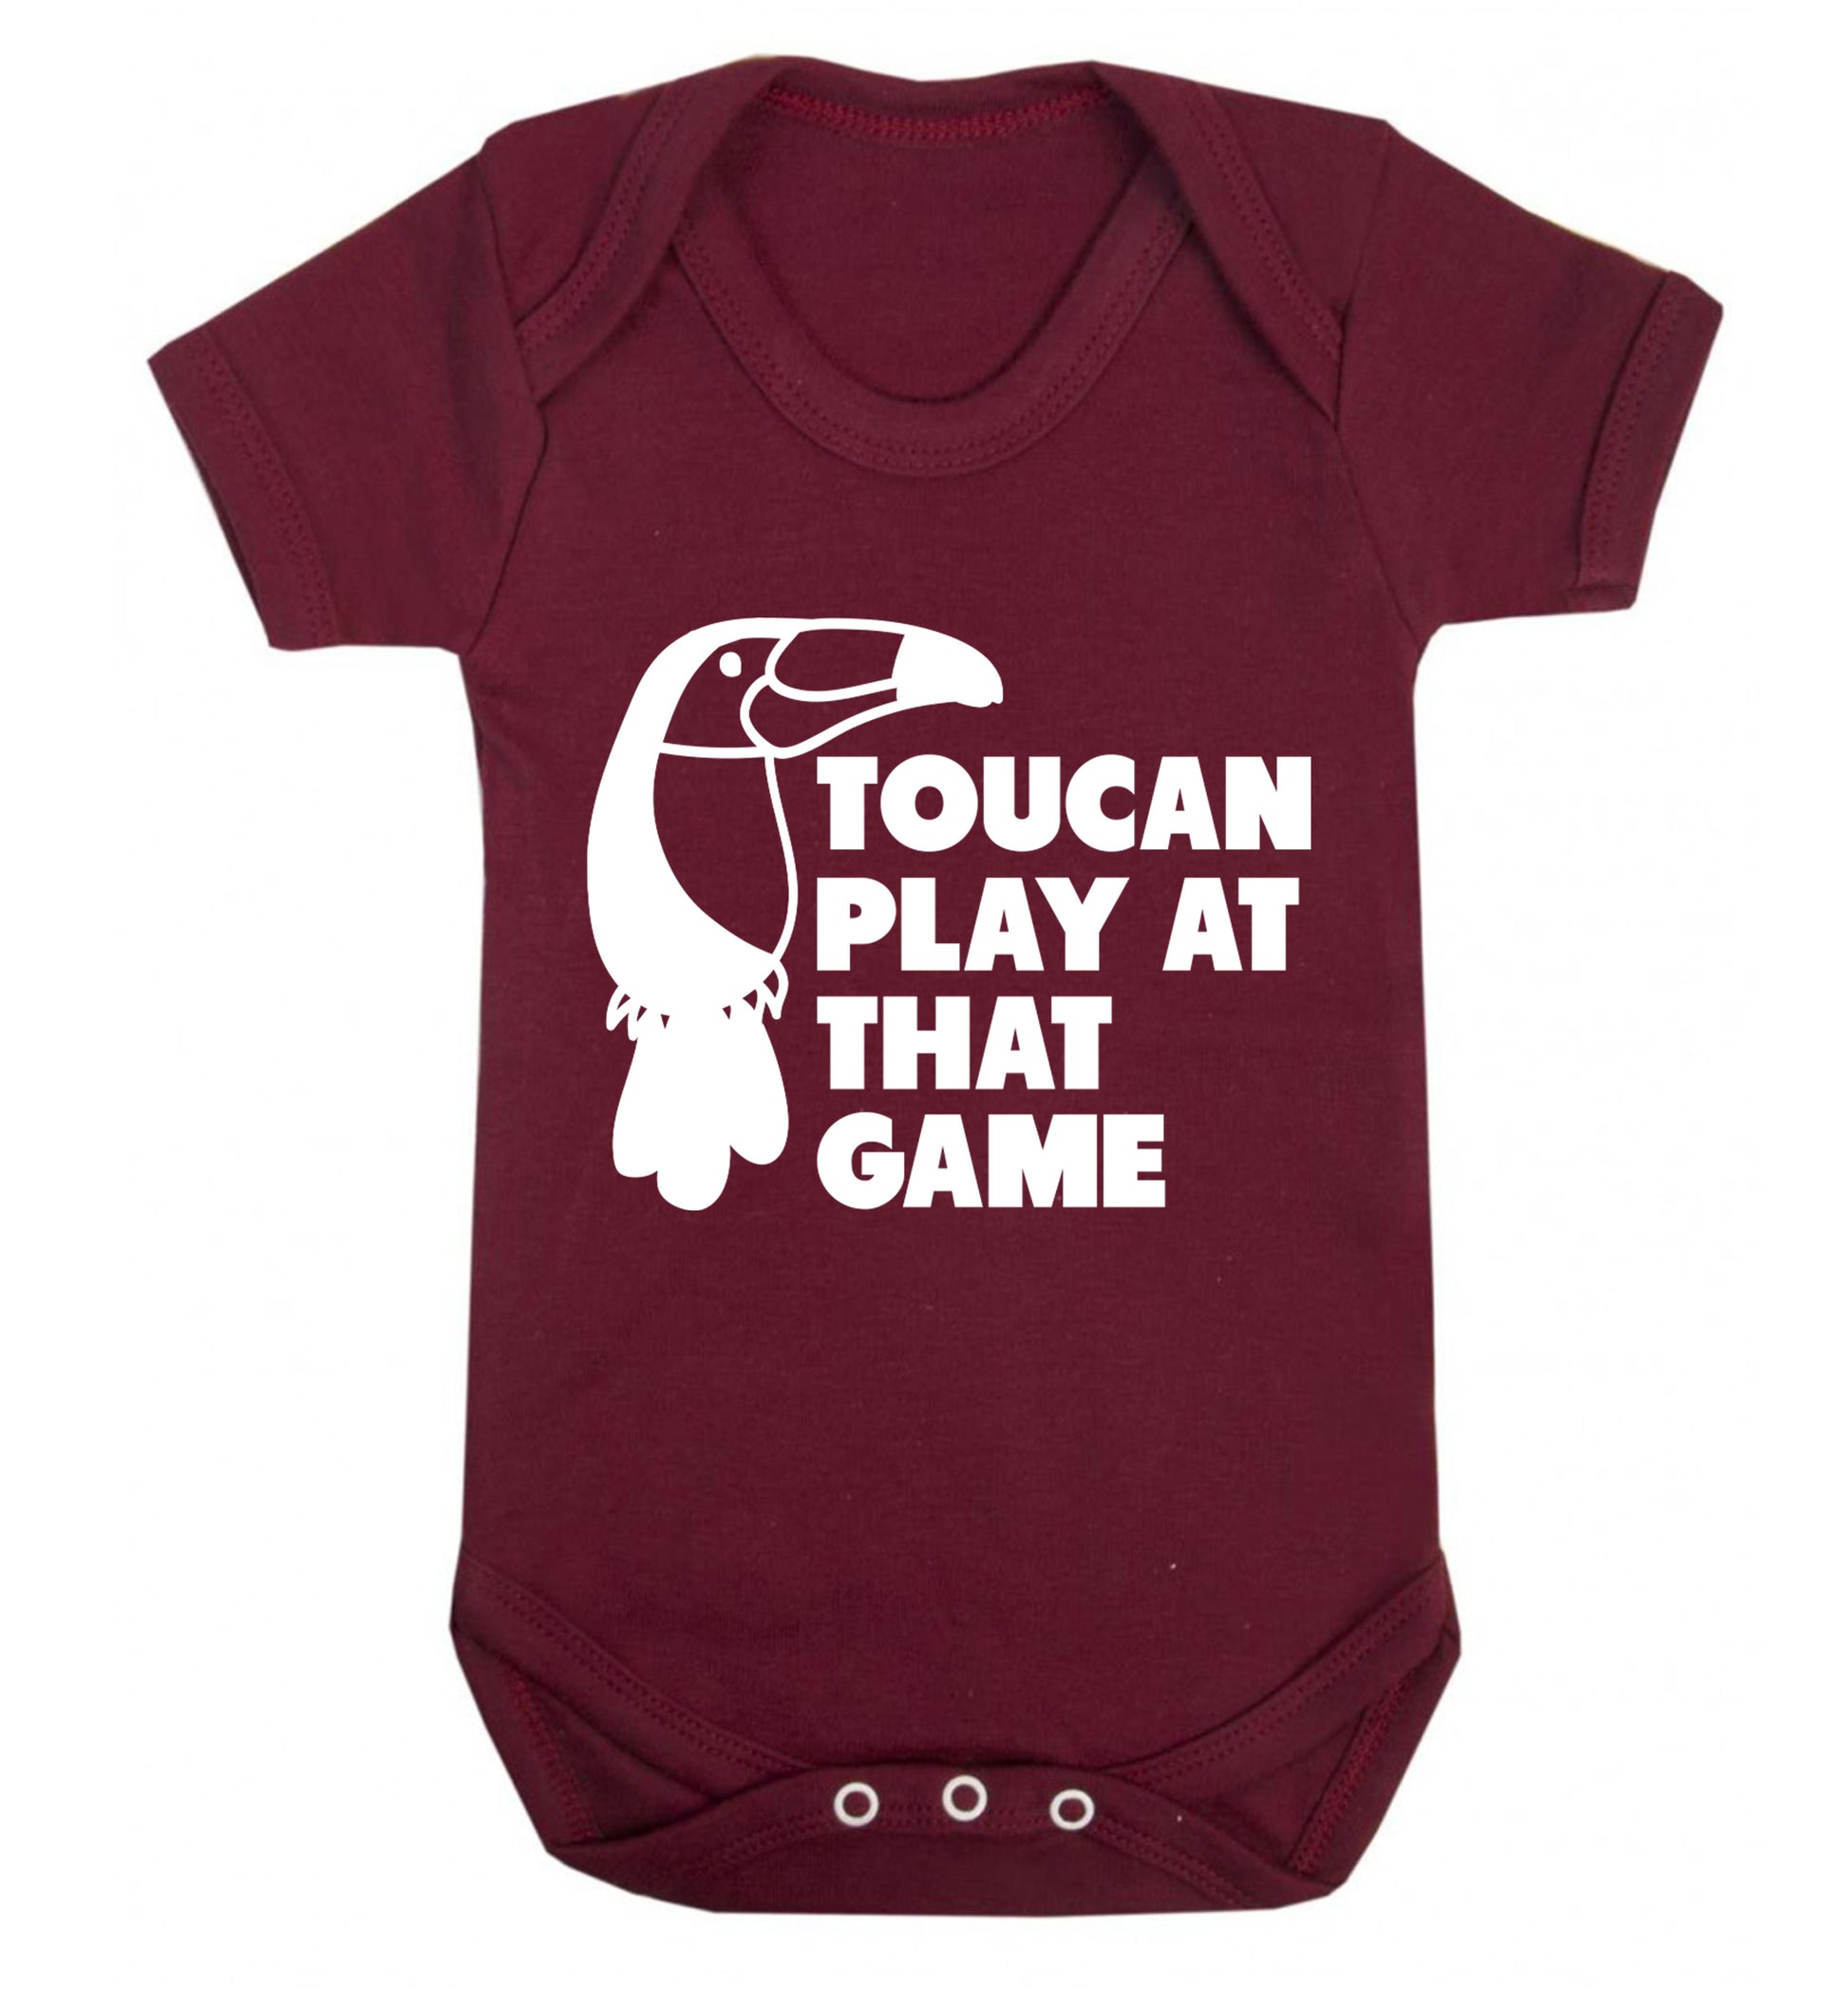 Toucan play at that game Baby Vest maroon 18-24 months